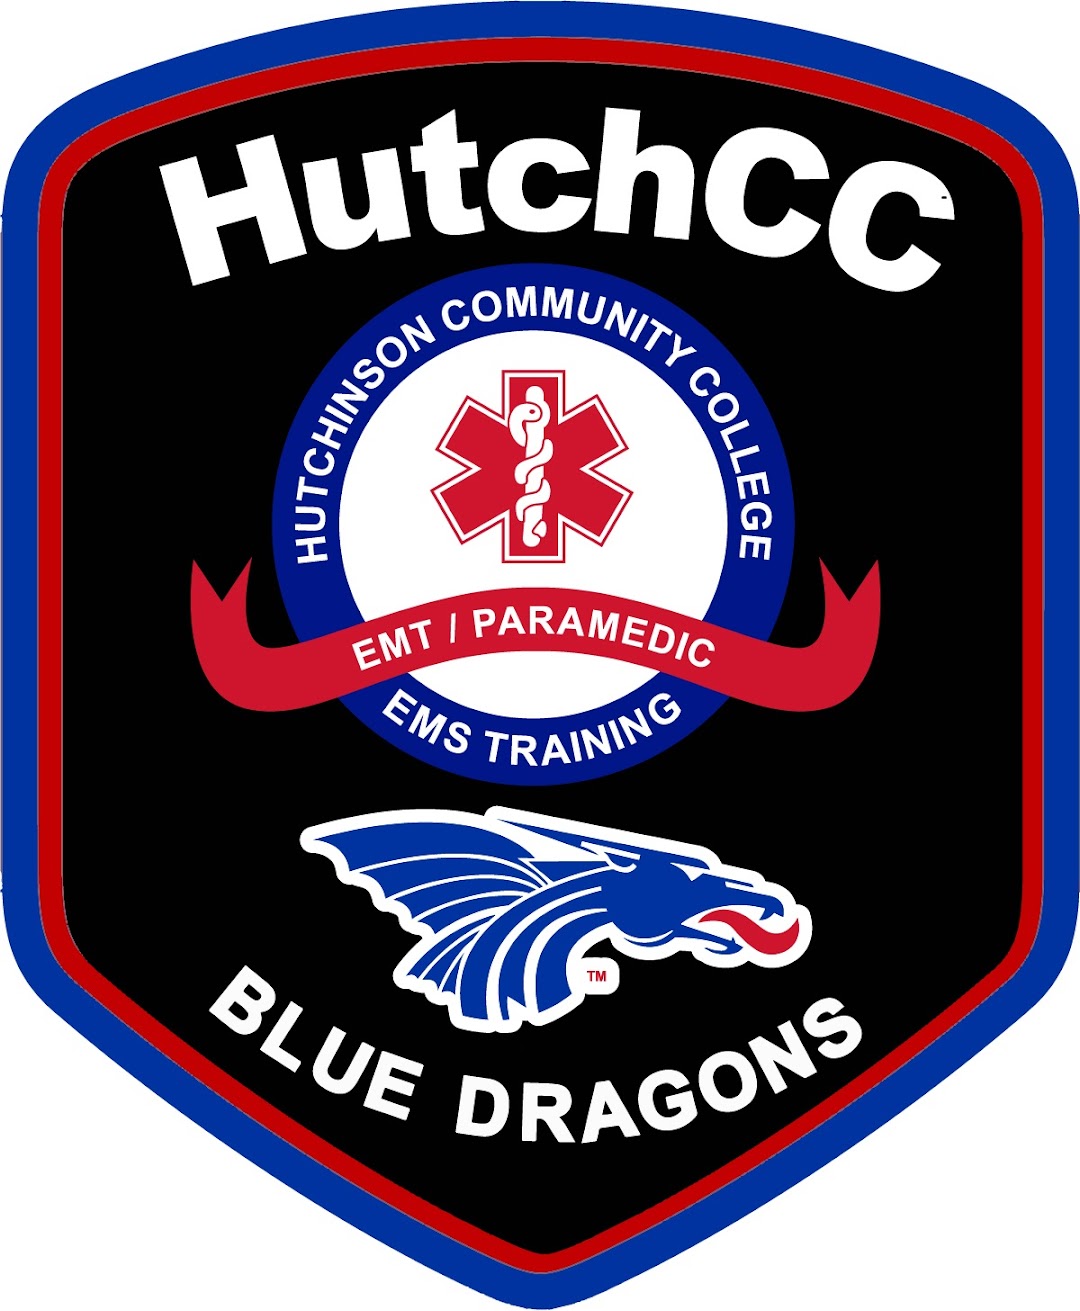 HutchCC EMS Continuing Education